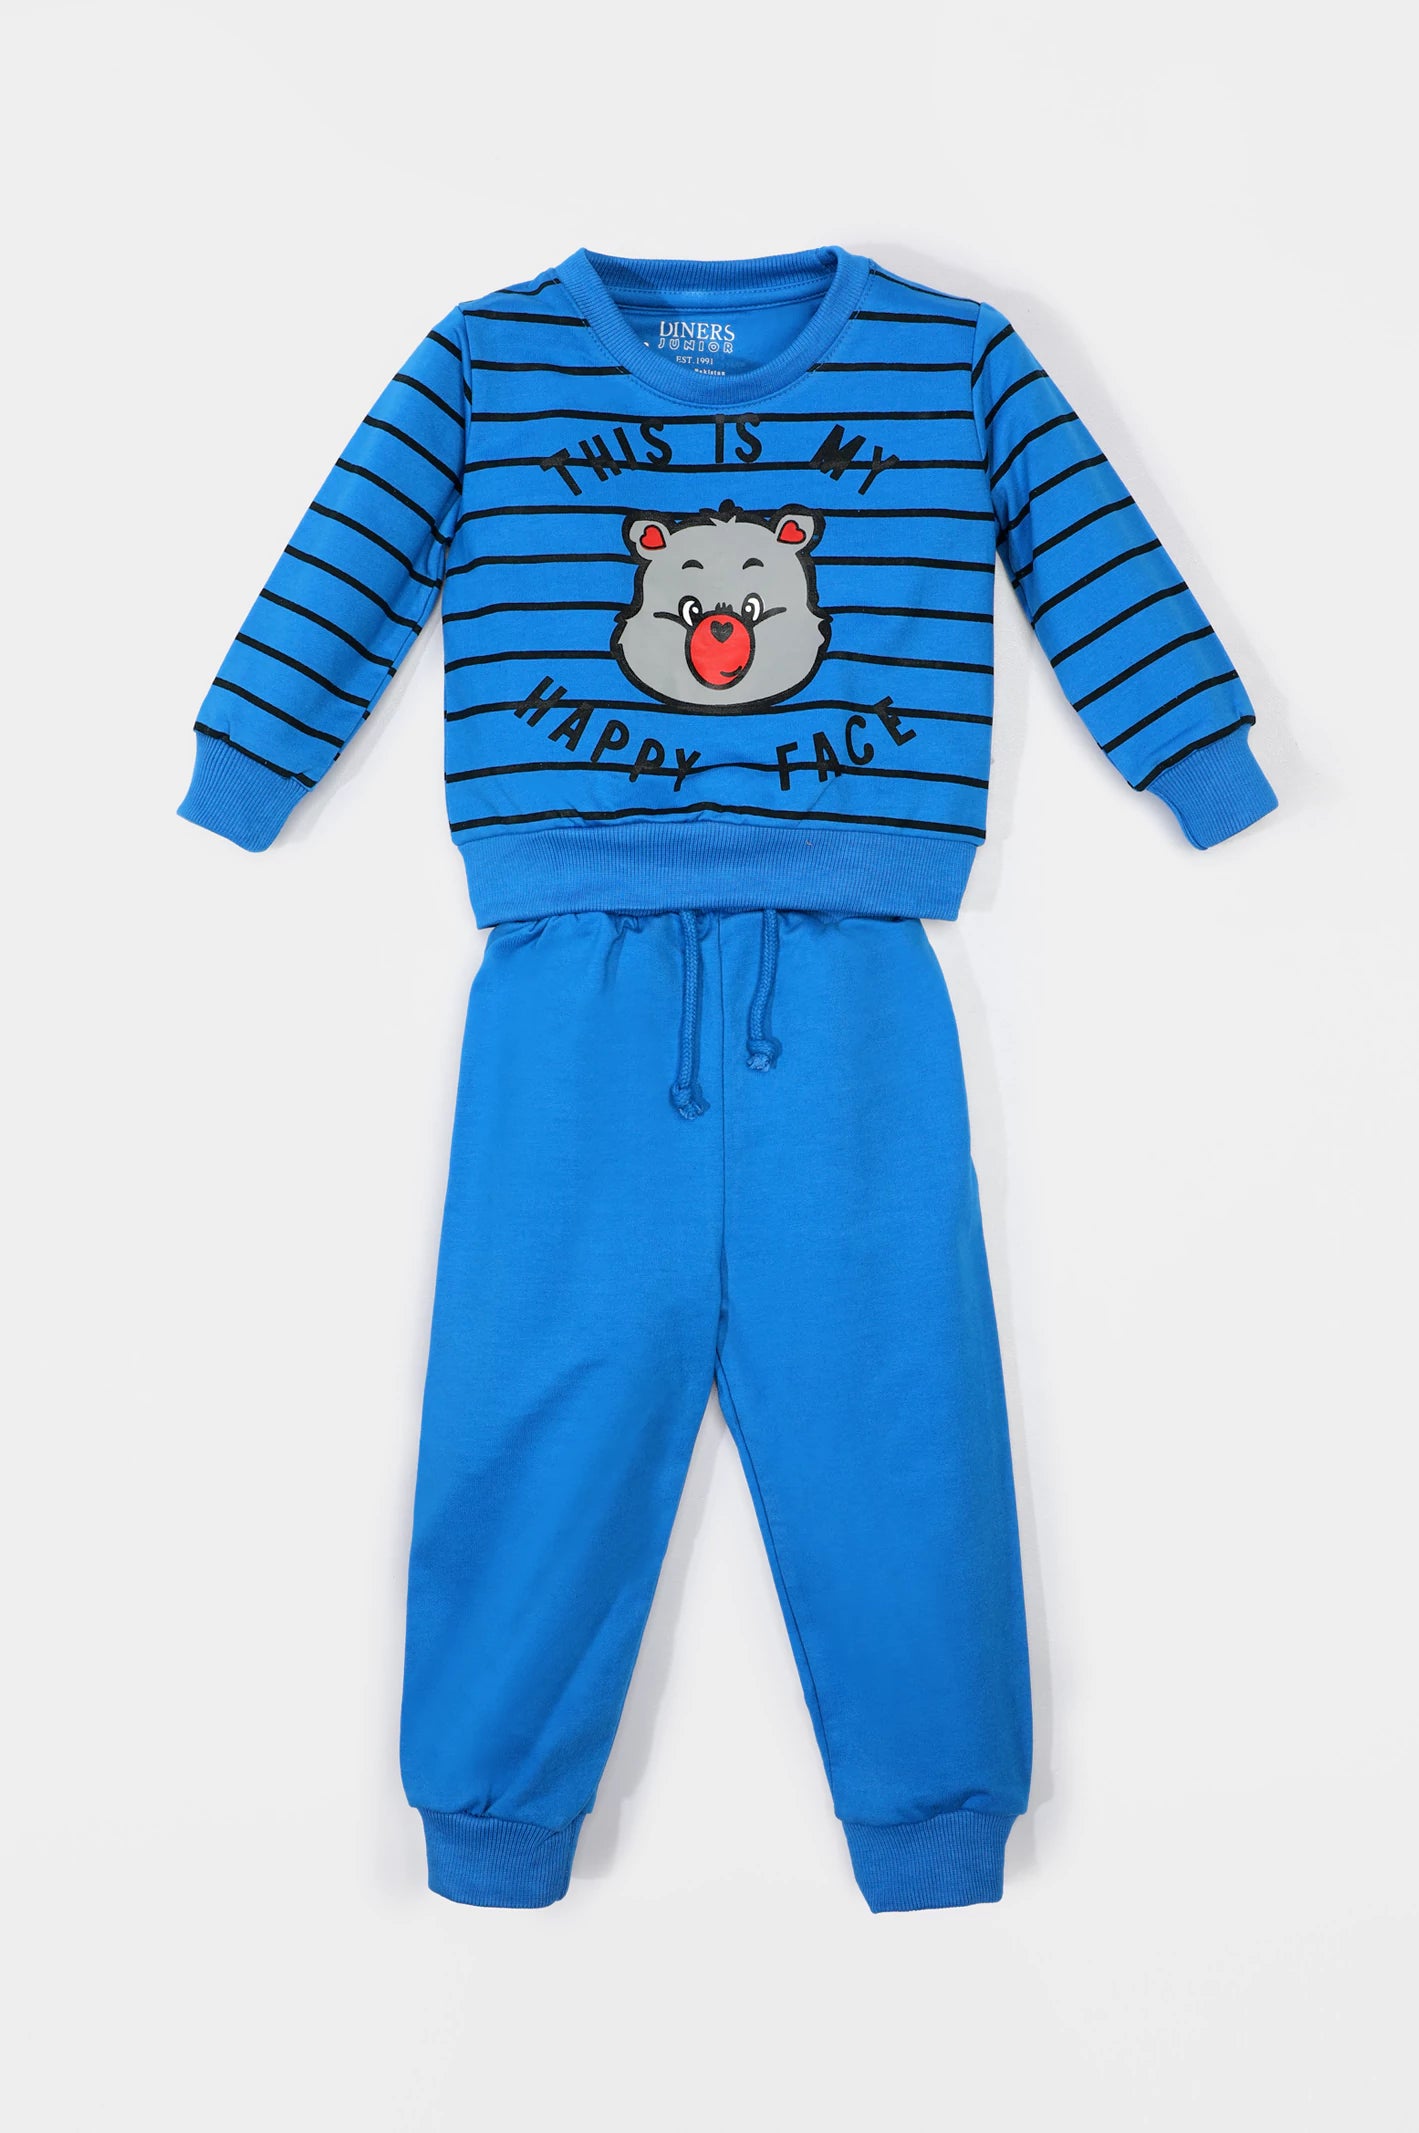 Blue Graphic Printed Boys Combos From Diners